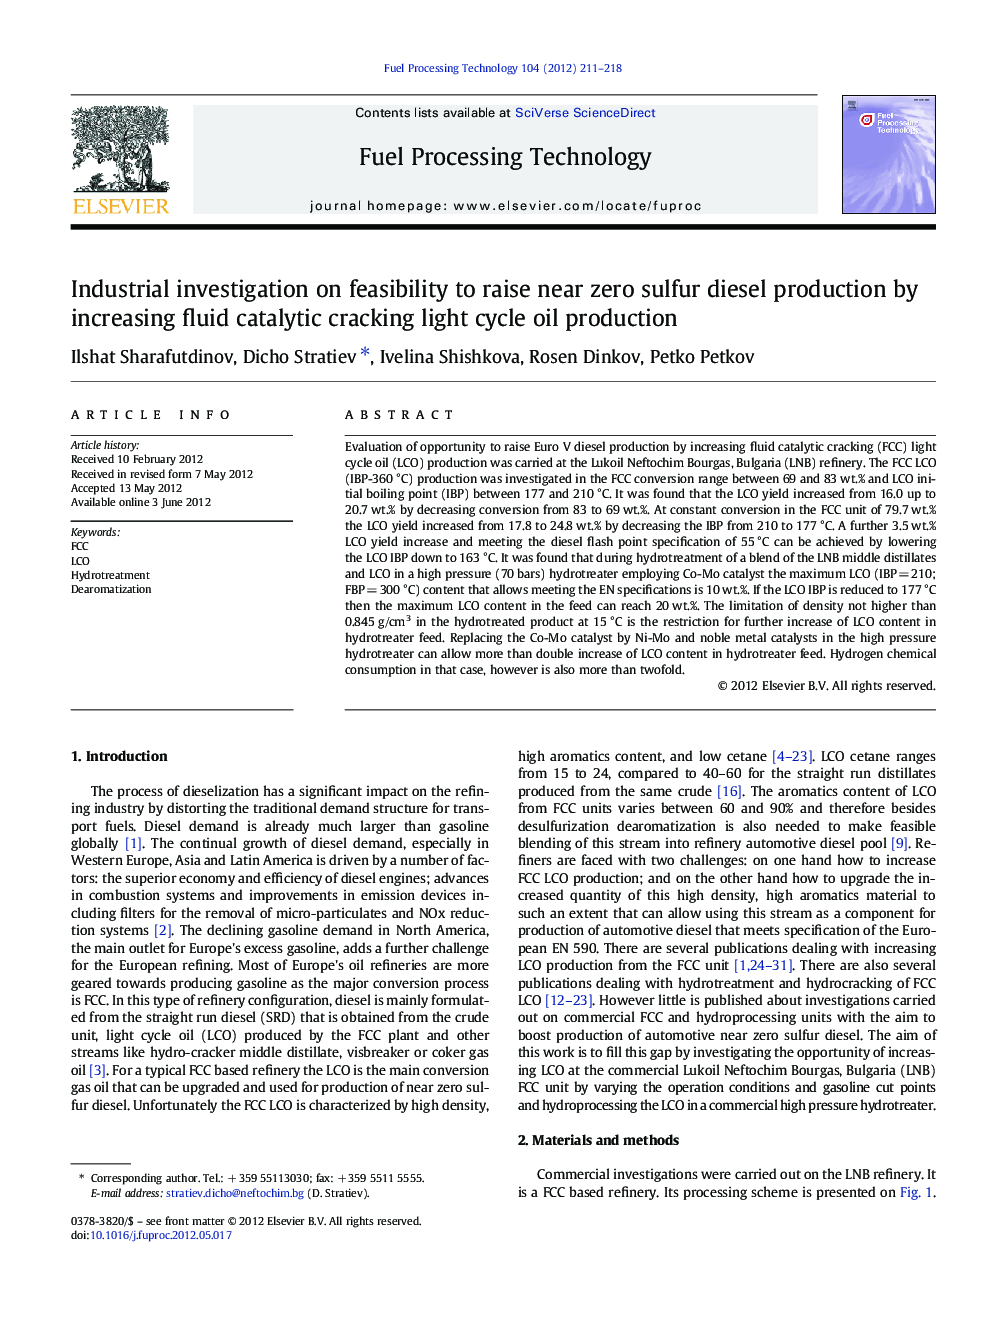 Industrial investigation on feasibility to raise near zero sulfur diesel production by increasing fluid catalytic cracking light cycle oil production